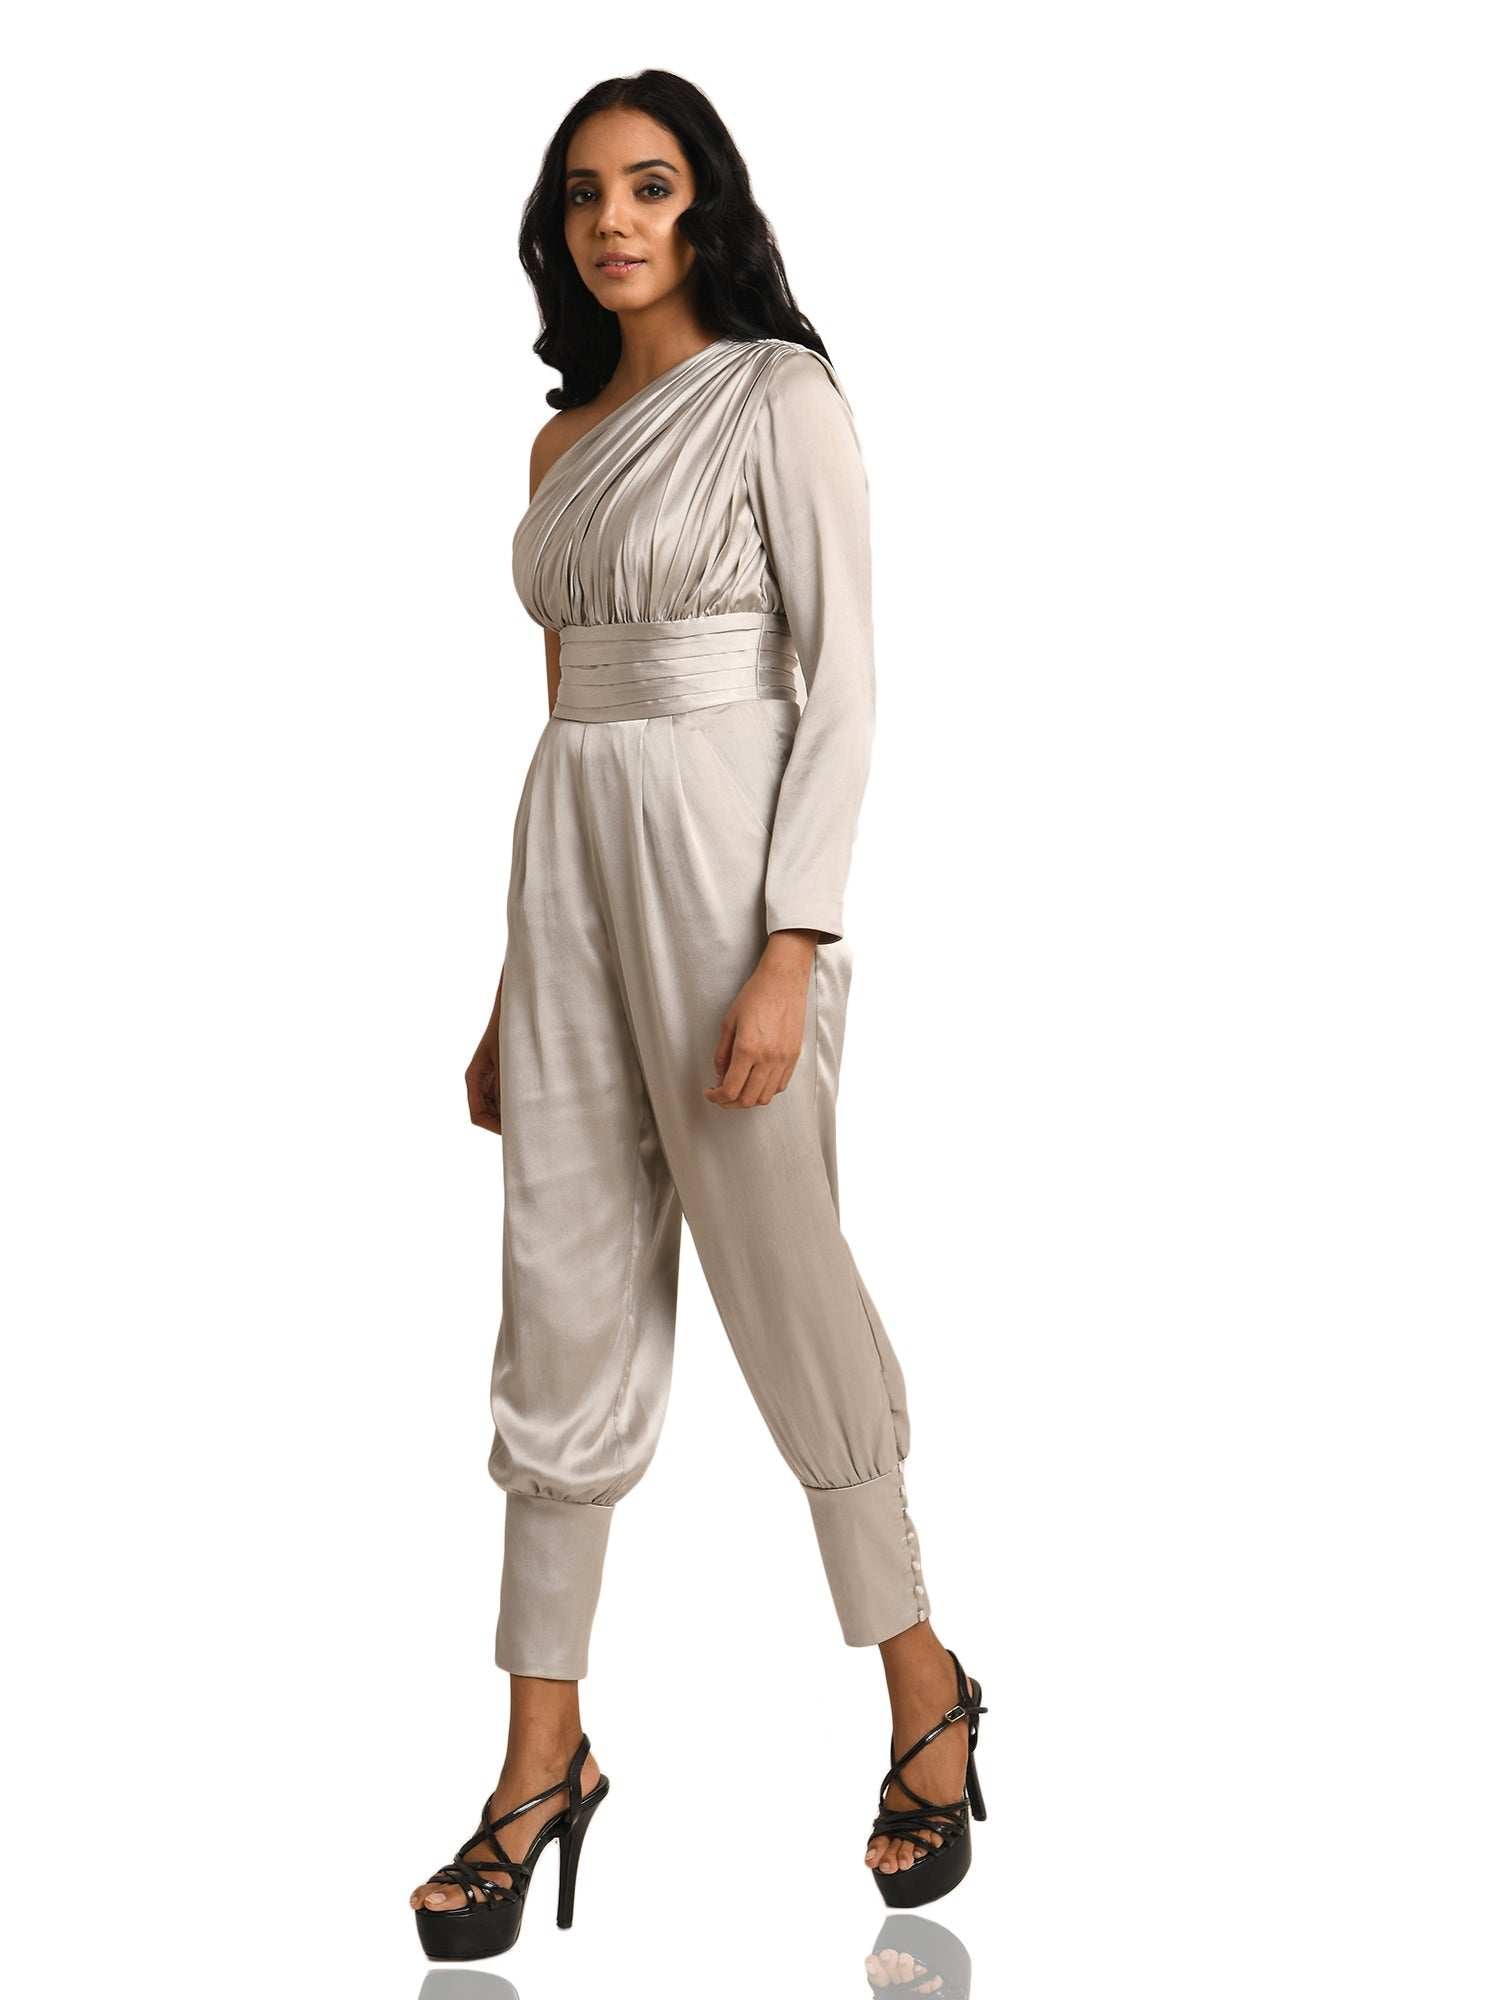 shining star silver jumpsuit